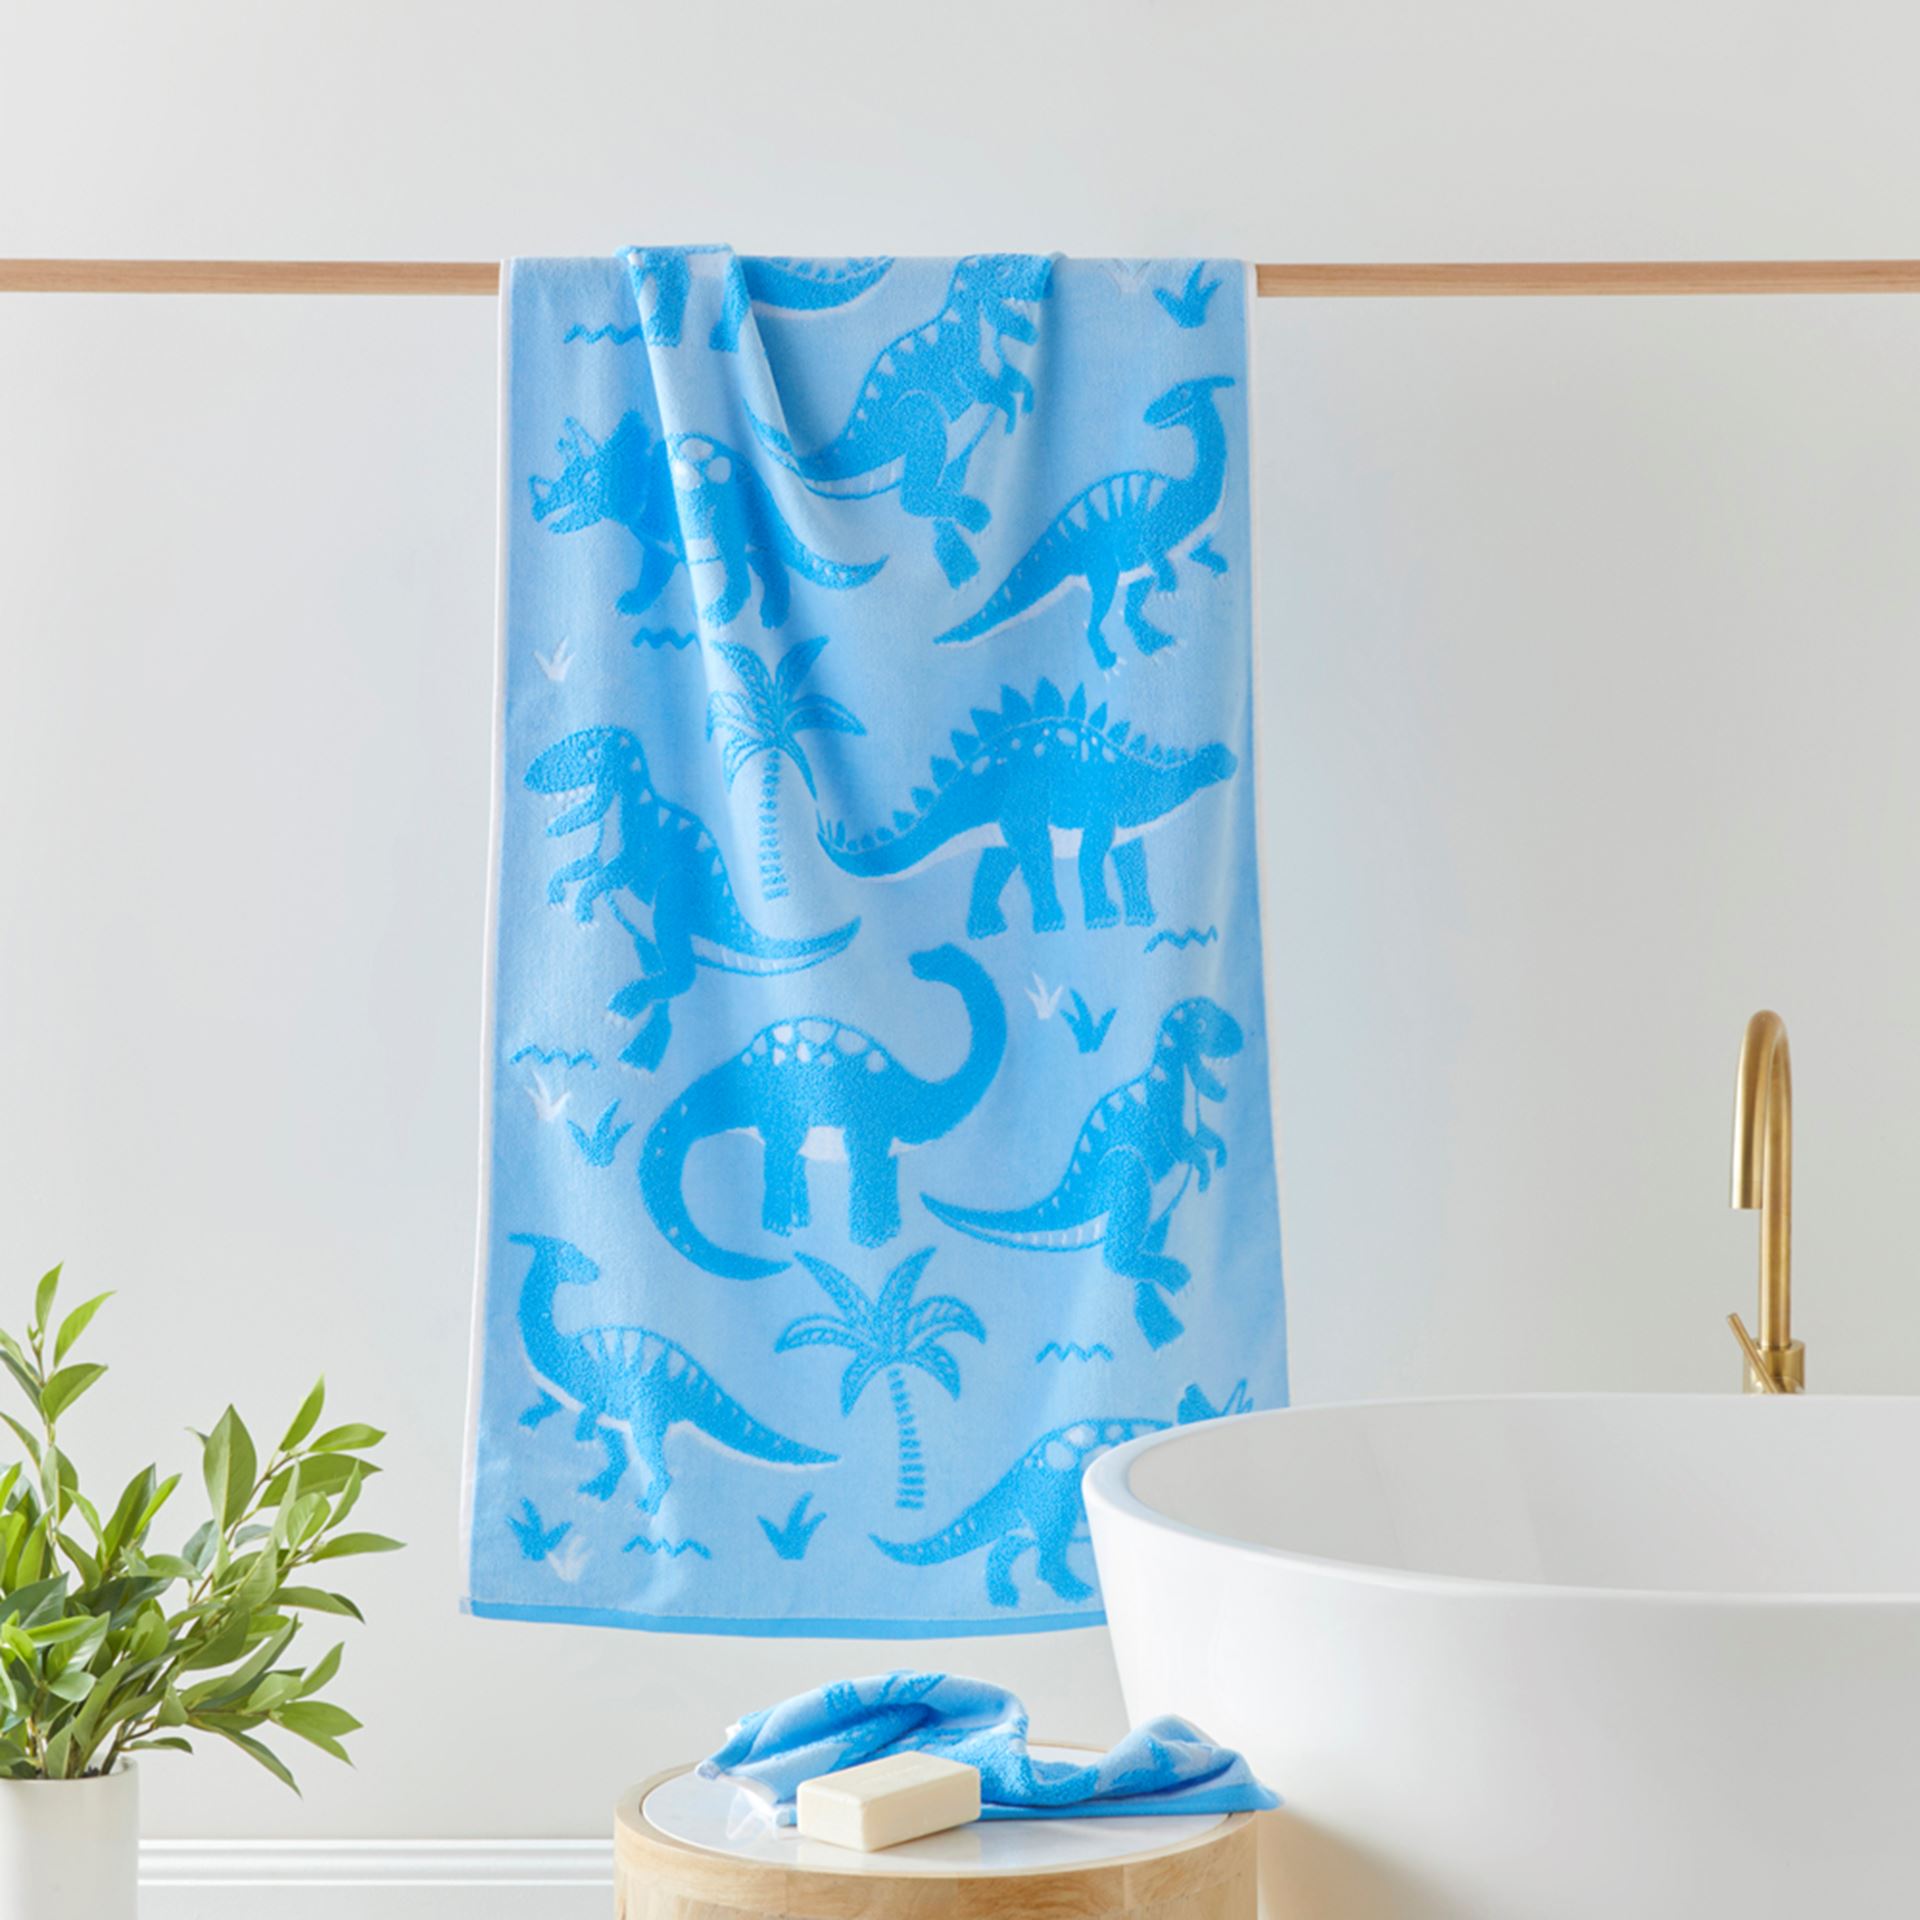 https://www.adairs.com.au/globalassets/13.-ecommerce/03.-product-images/2023_images/kids/kids-bathroom/56129_blue_01.jpg?width=1920&mode=crop&heightratio=1&quality=80